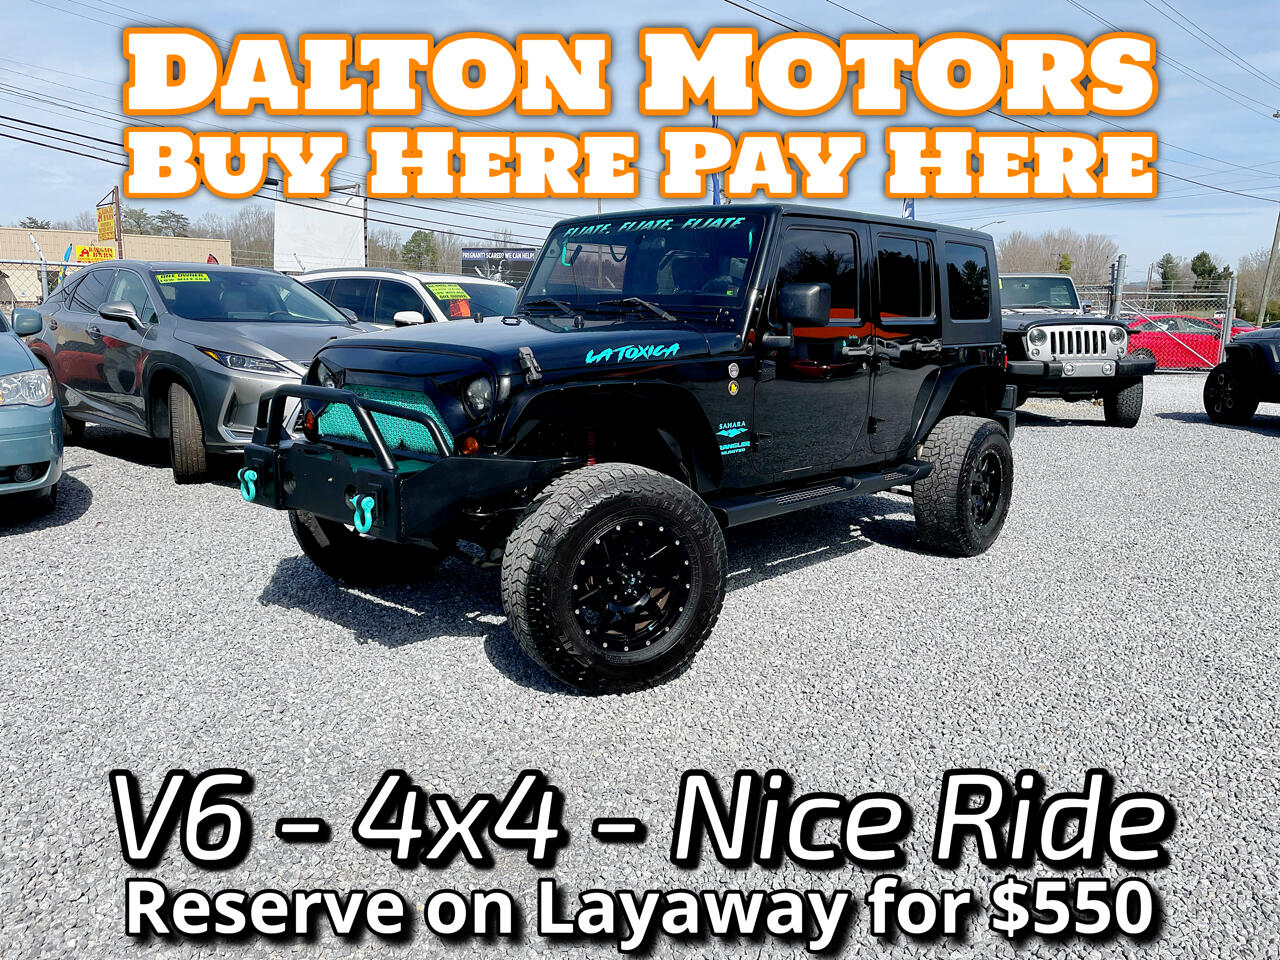 Buy Here Pay Here 2009 Jeep Wrangler Unlimited Sahara 4WD for Sale in  Morristown TN 37814 Dalton Motors